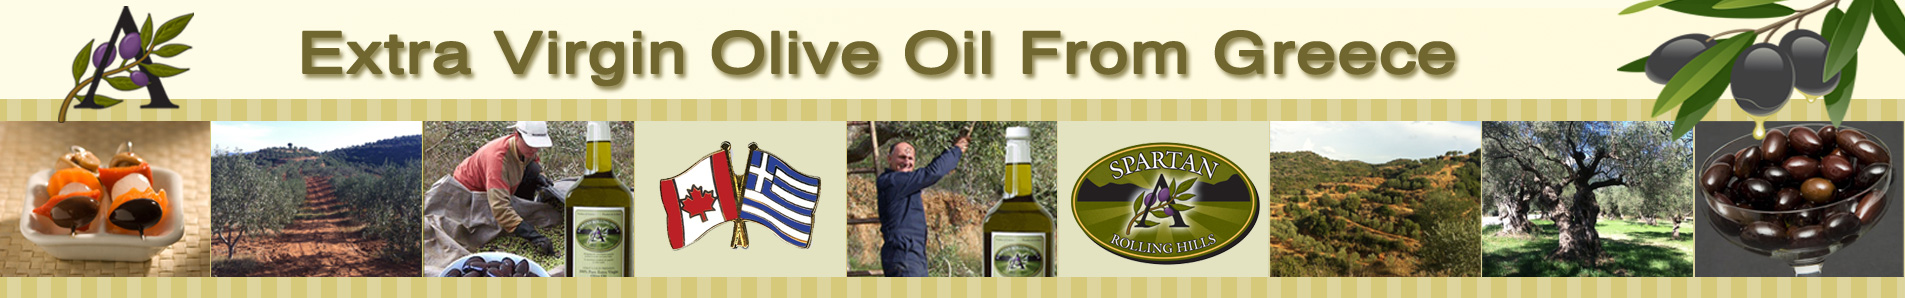 Extra Virgin Olive Oil From Greece